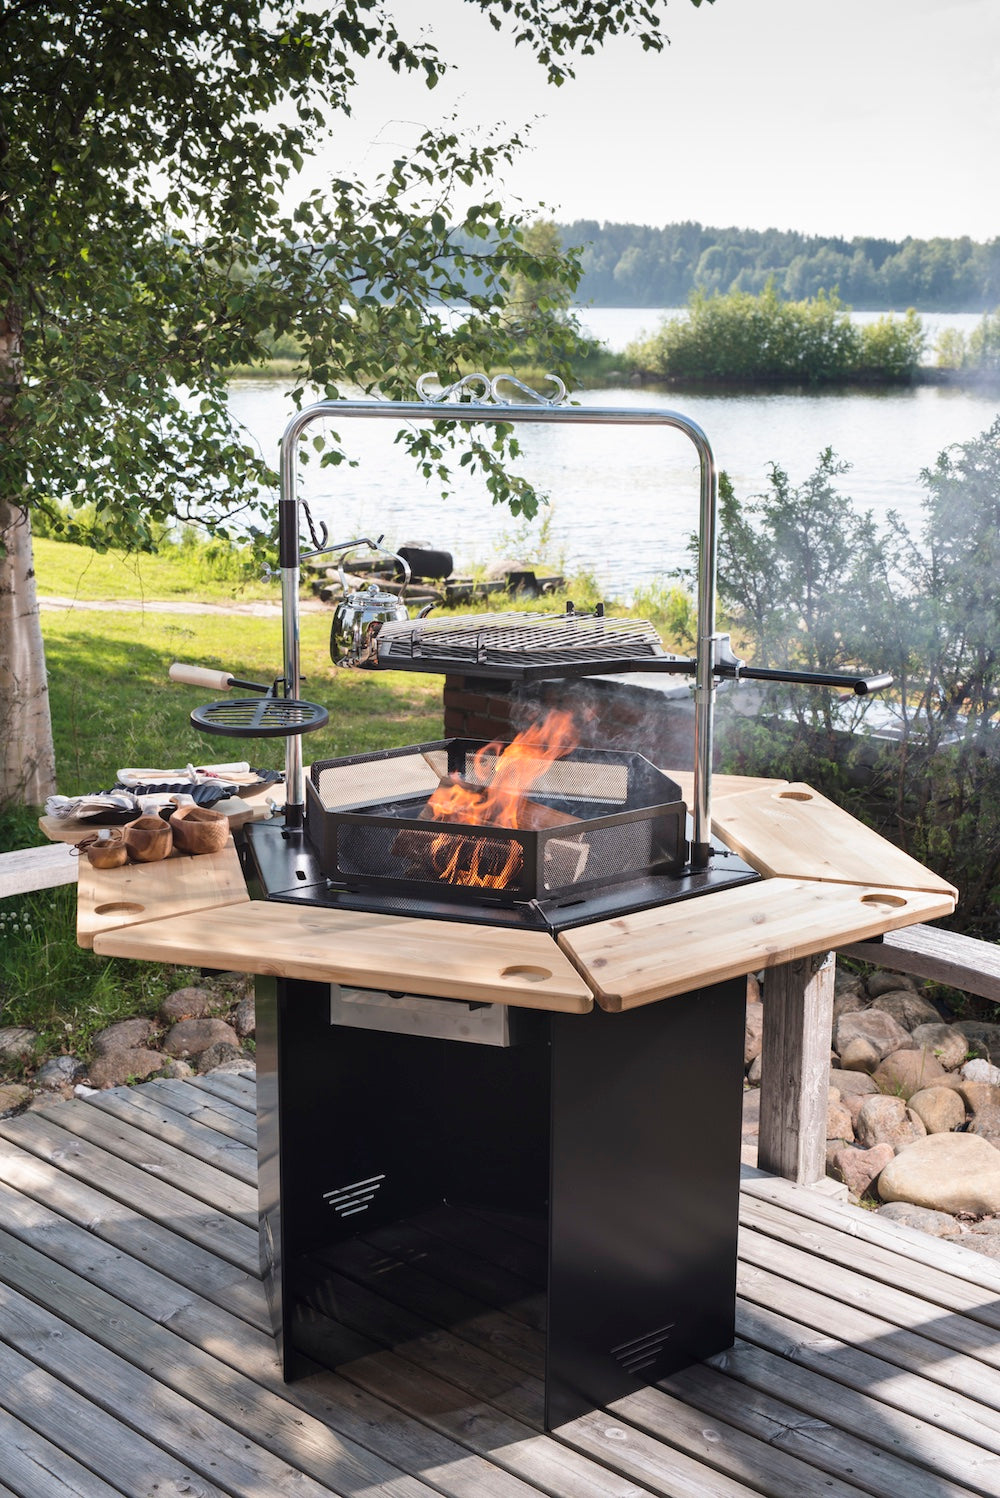     A terrace Kota Grill sits without a hood with multiple attachments on it.   